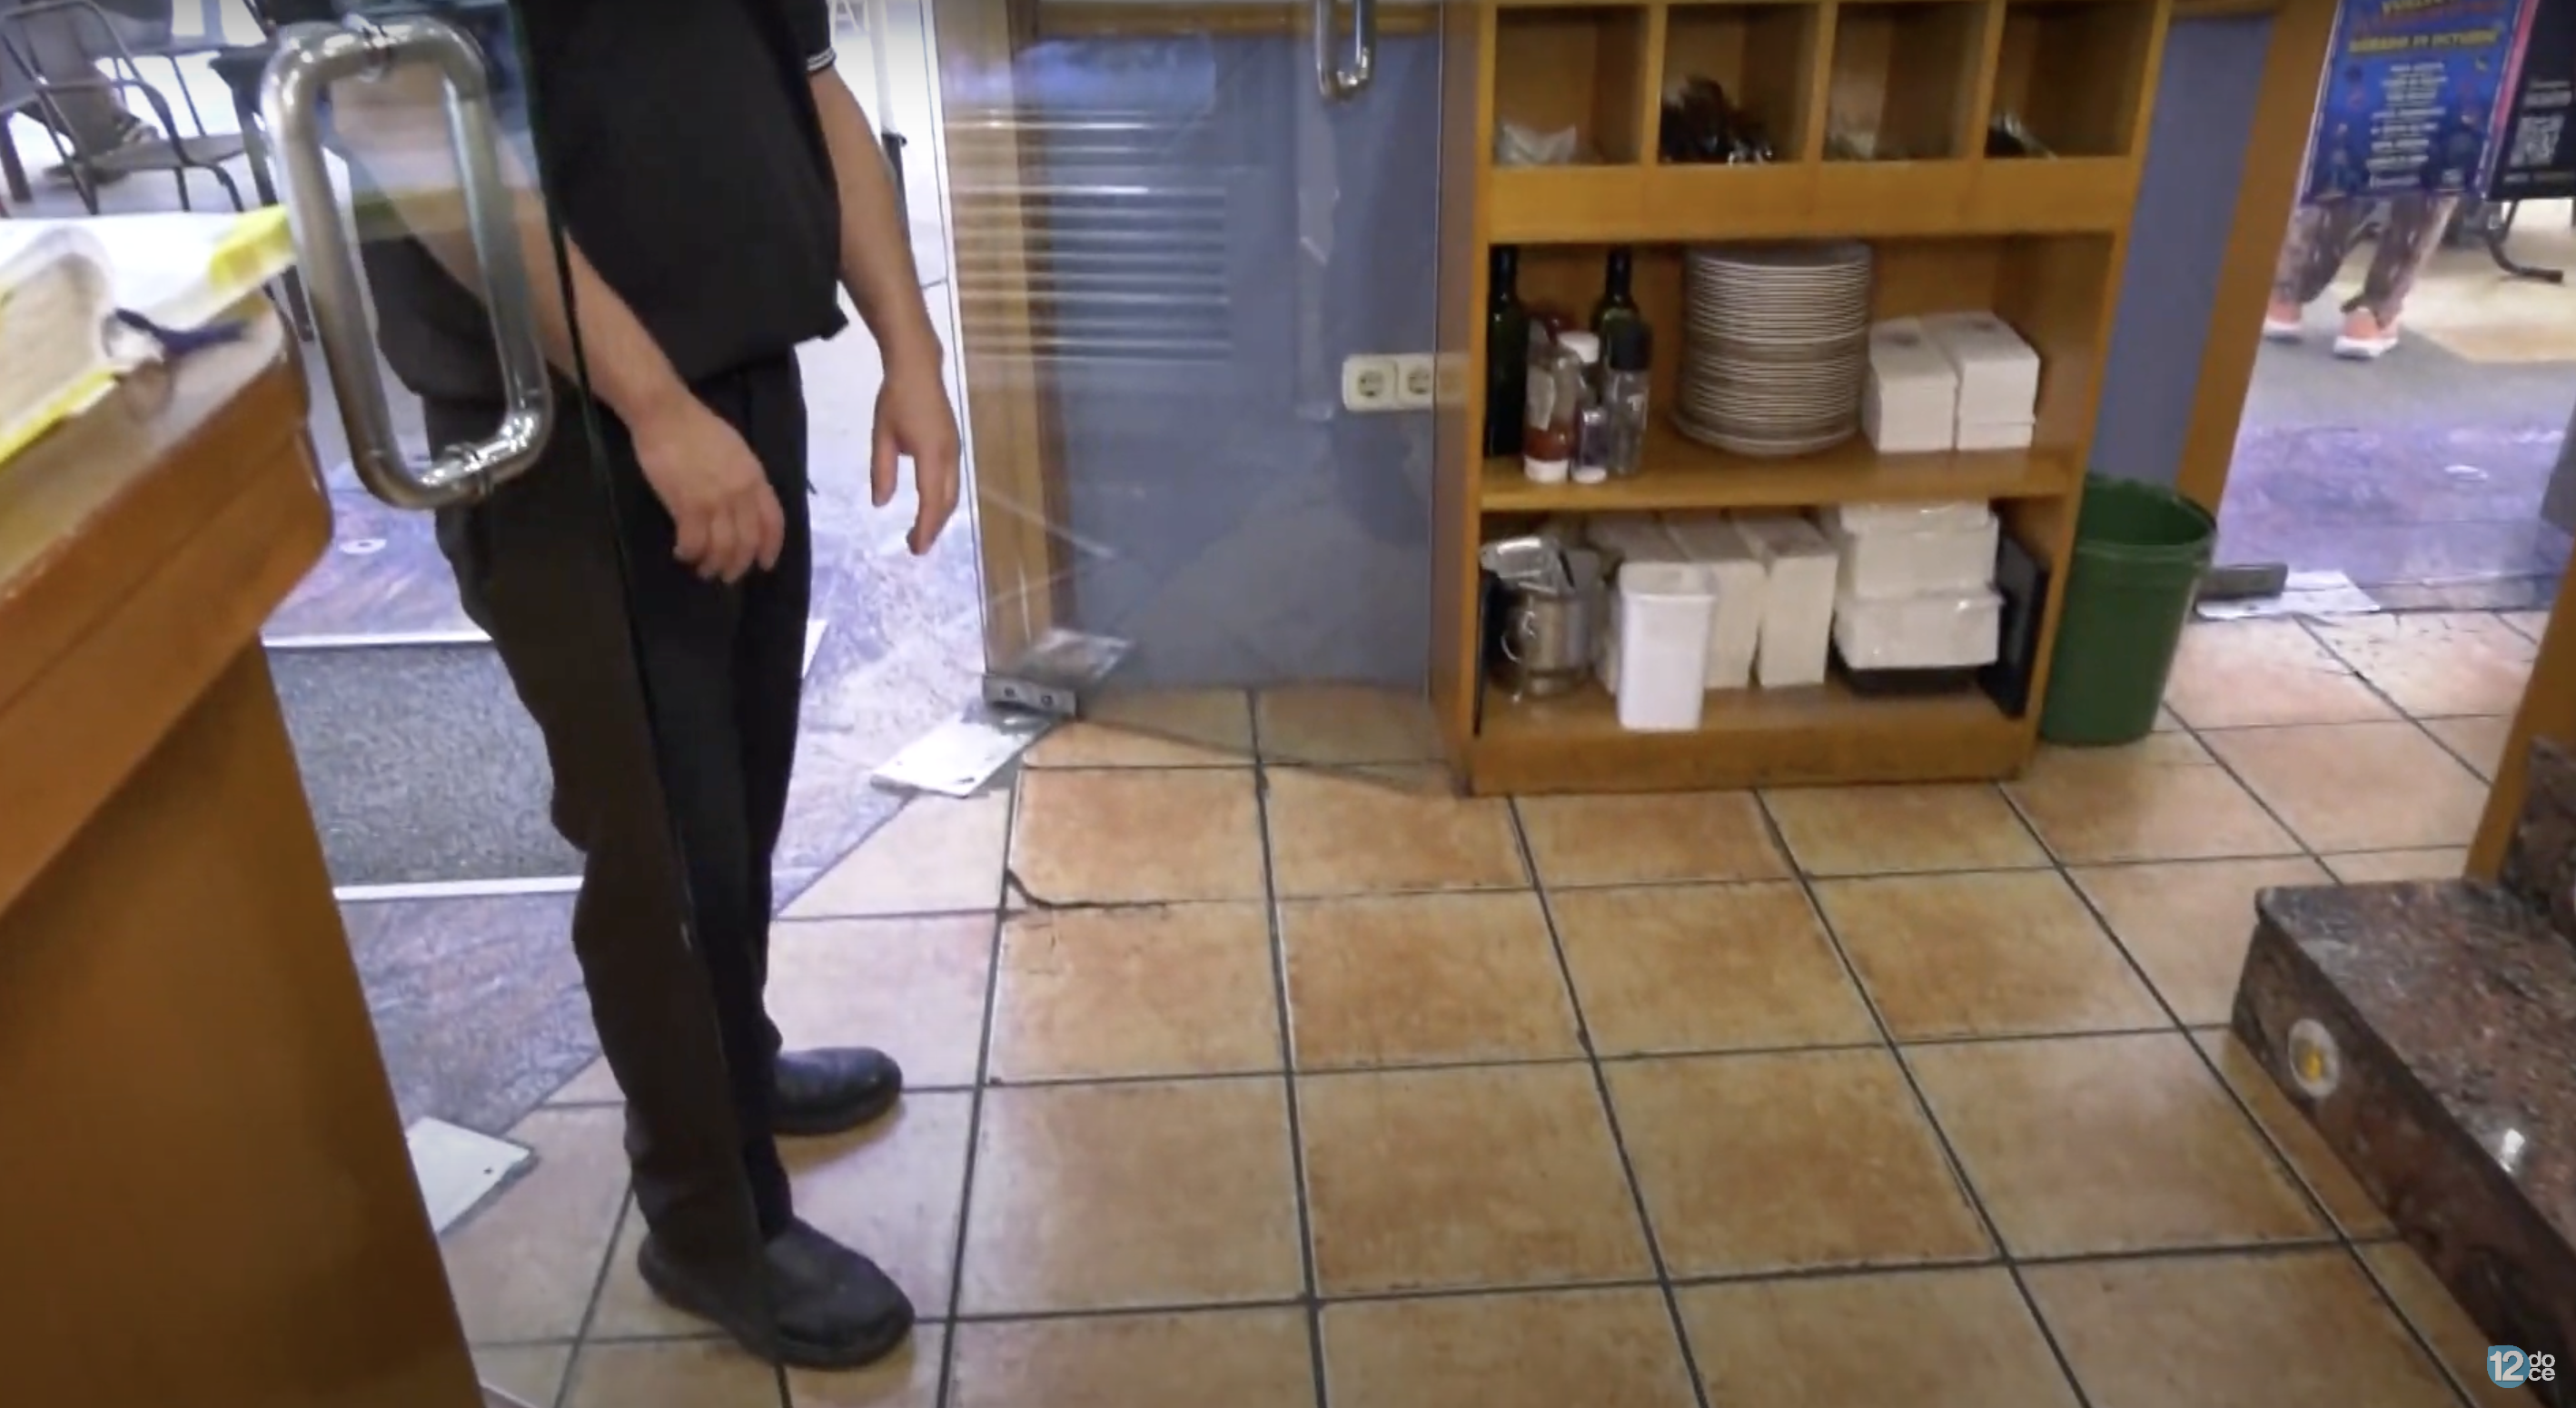 Moisés Doménech, owner of the restaurant El Buen Comer, shows the floor where Aidas reportedly fell after complaining of chest pain, as seen in a video dated September 21, 2023 | Source: youtube.com/12tv_es